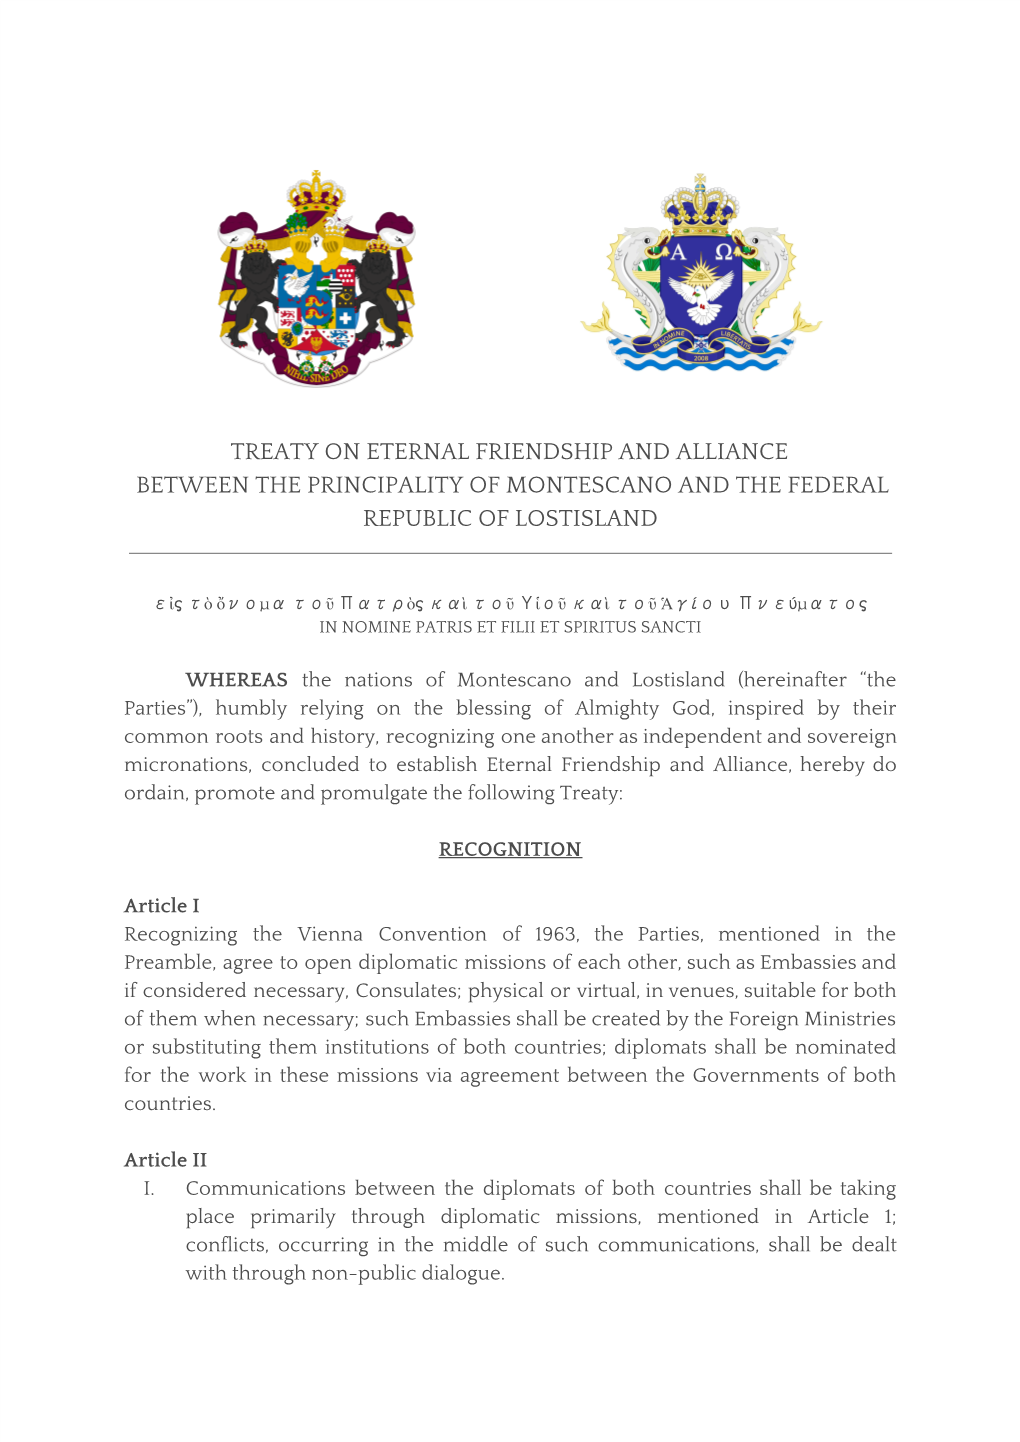 Treaty on Eternal Friendship and Alliance Between the Principality of Montescano and the Federal Republic of Lostisland